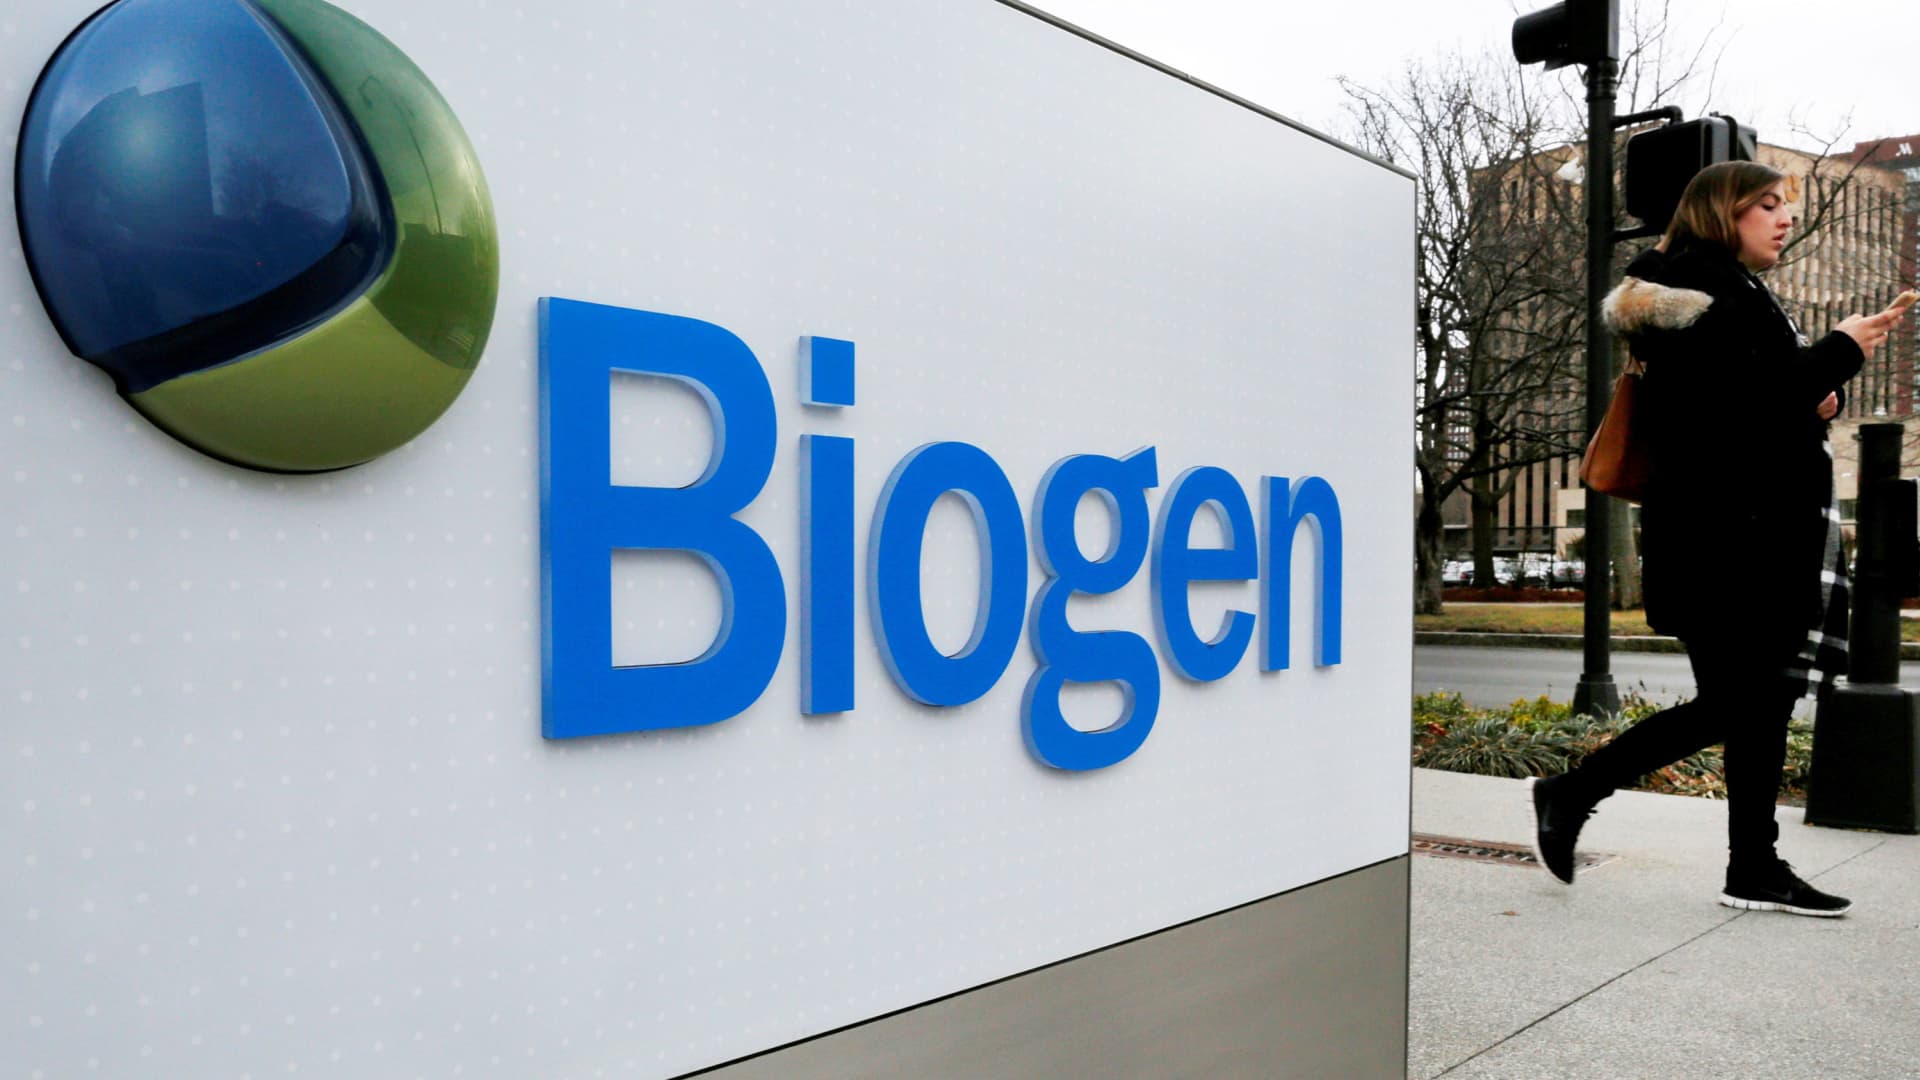 Biogen to pay 0 million to settle allegations it paid doctors kickbacks to prescribe multiple sclerosis drugs